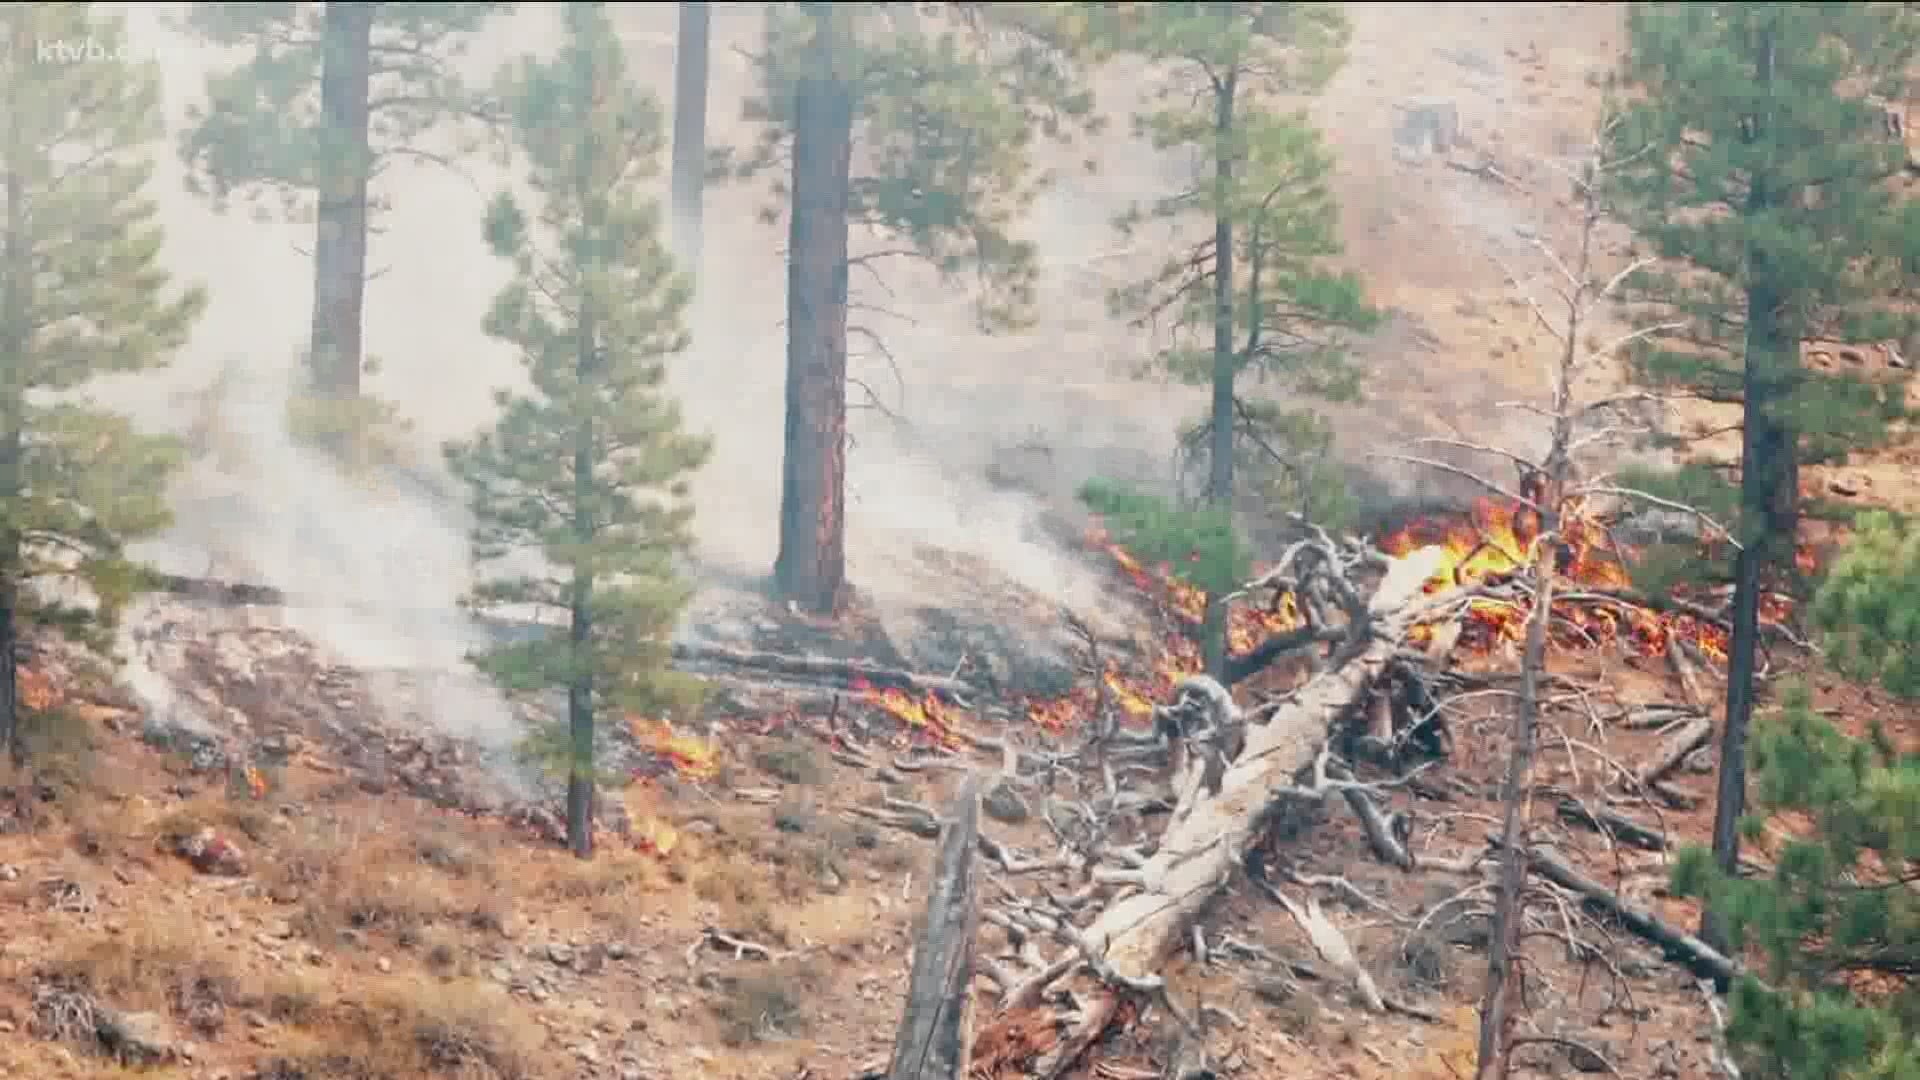 Dry conditions bring hardships to agricultural lands and create a wildfire risk.